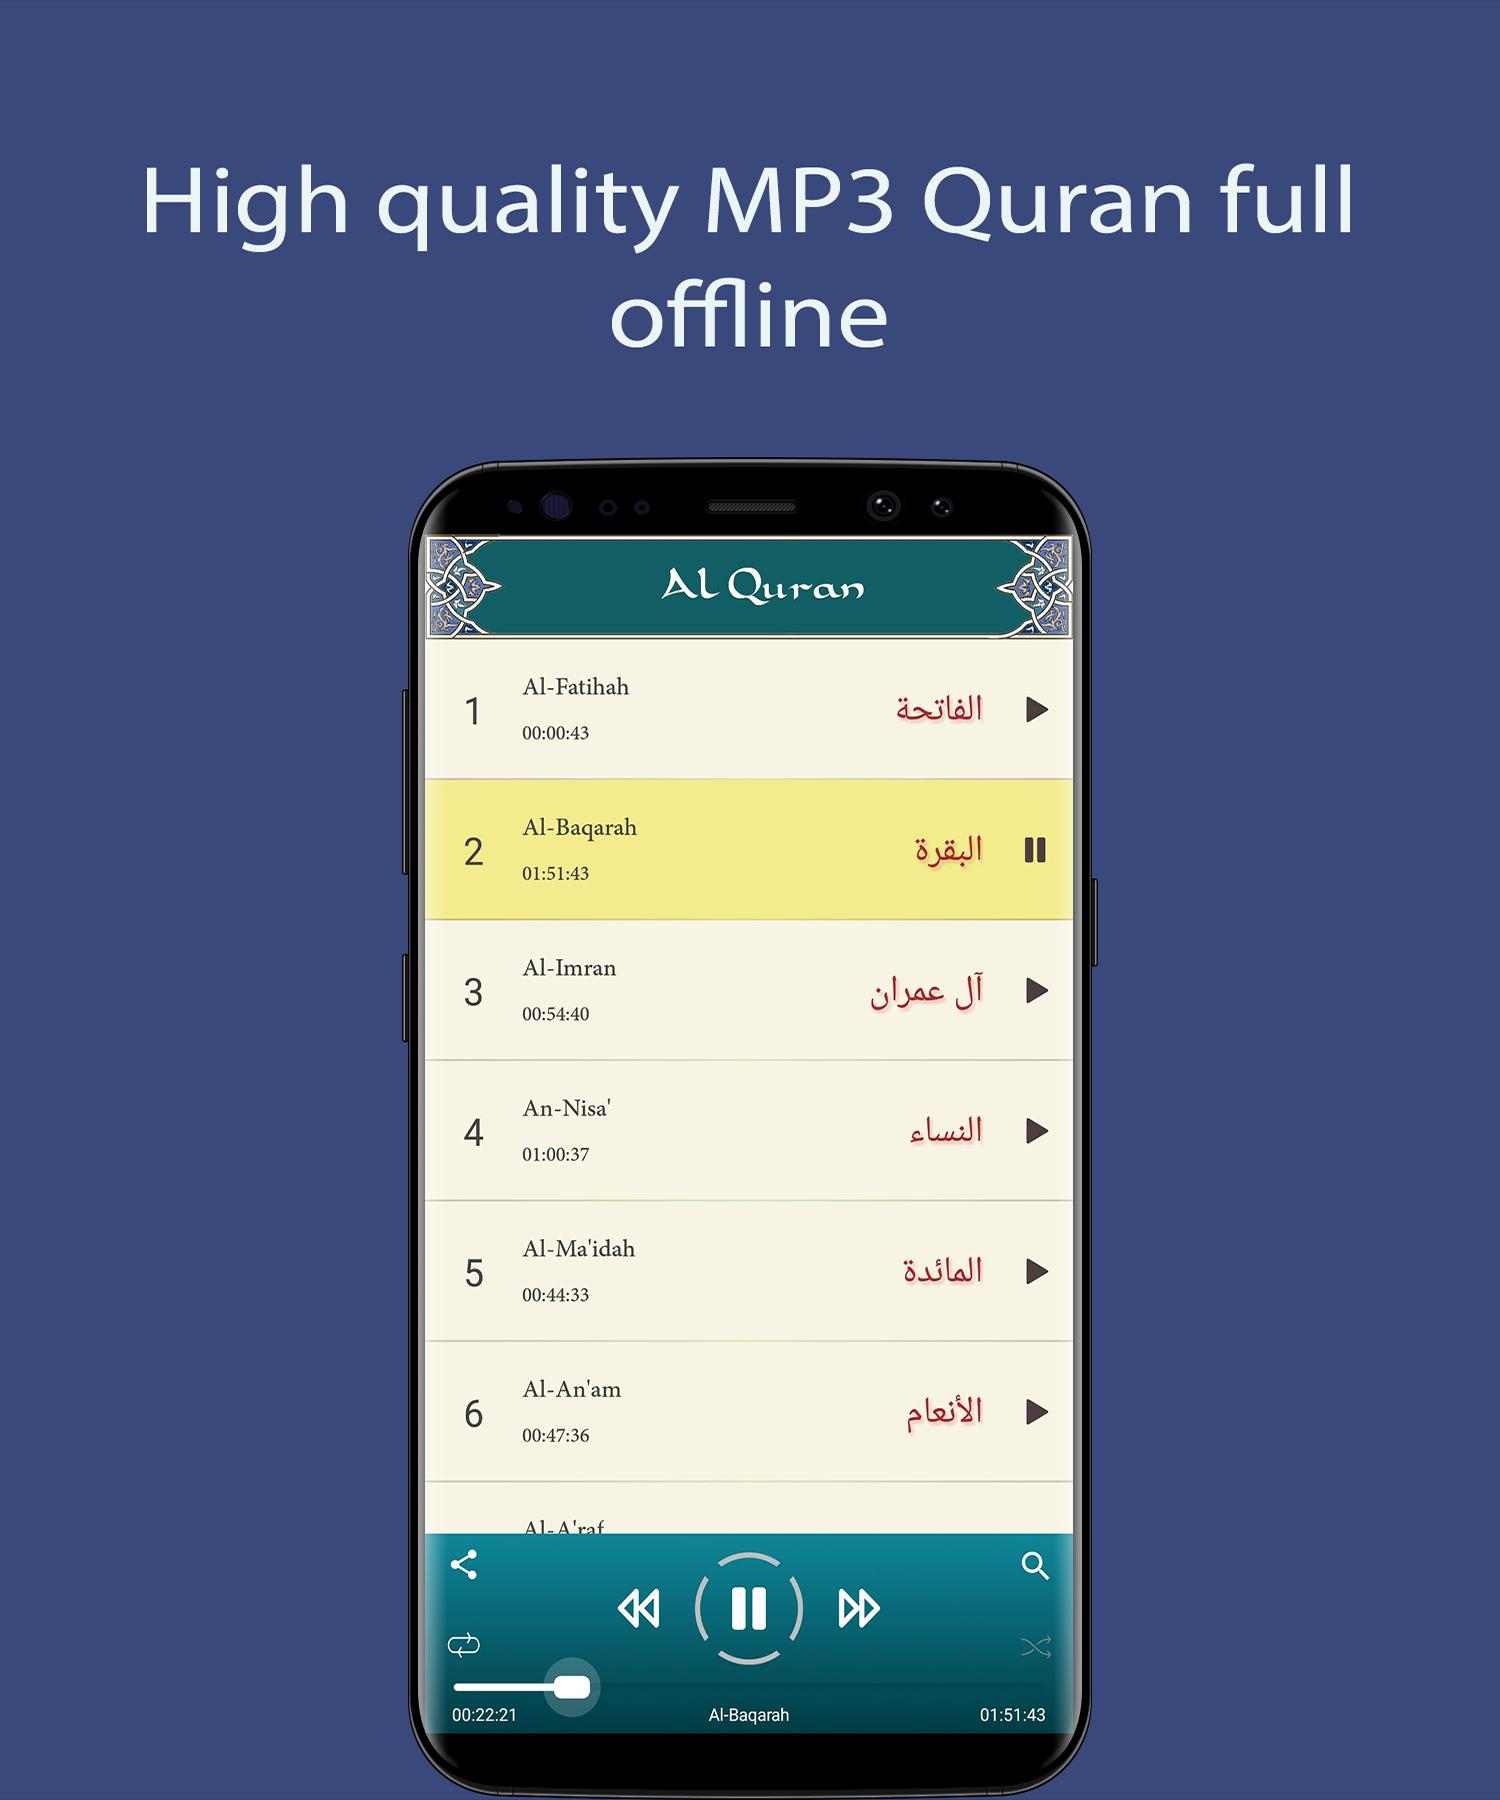 Maher Al Mueaqly - Full Offline Quran MP3 for Android - APK Download